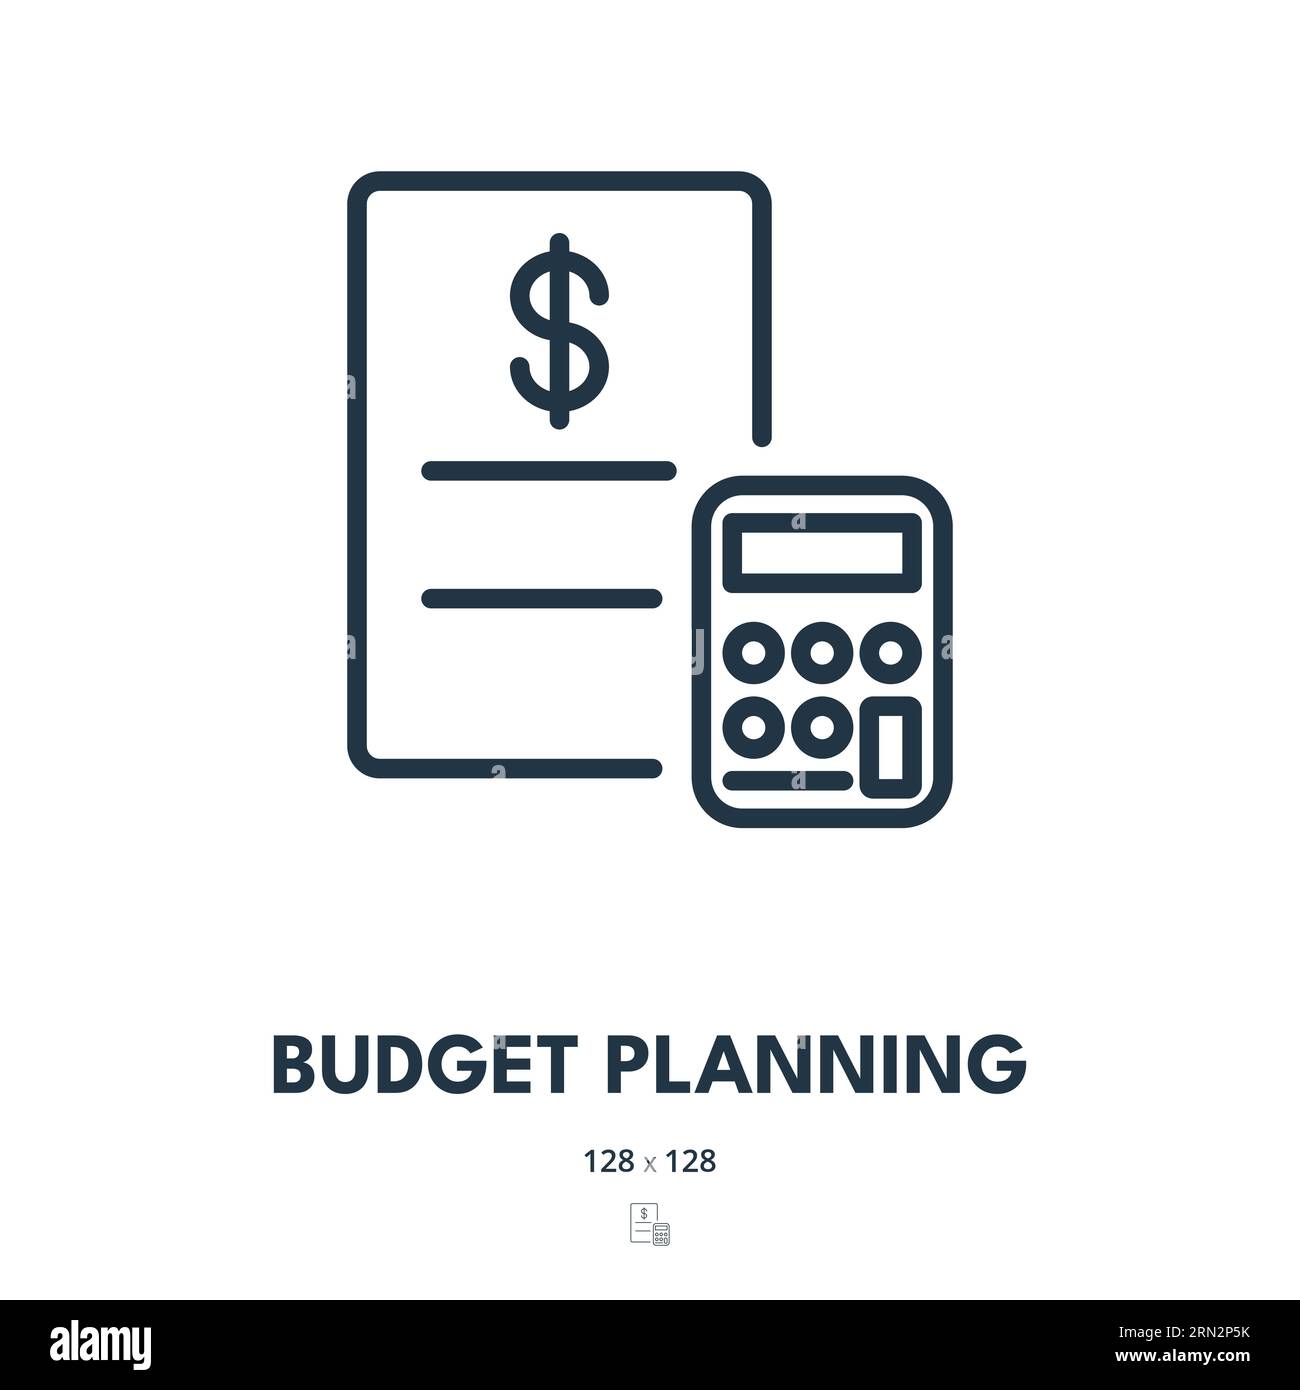 Budget Planning Icon. Accounting, Budgeting, Calculation. Editable Stroke. Simple Vector Icon Stock Vector